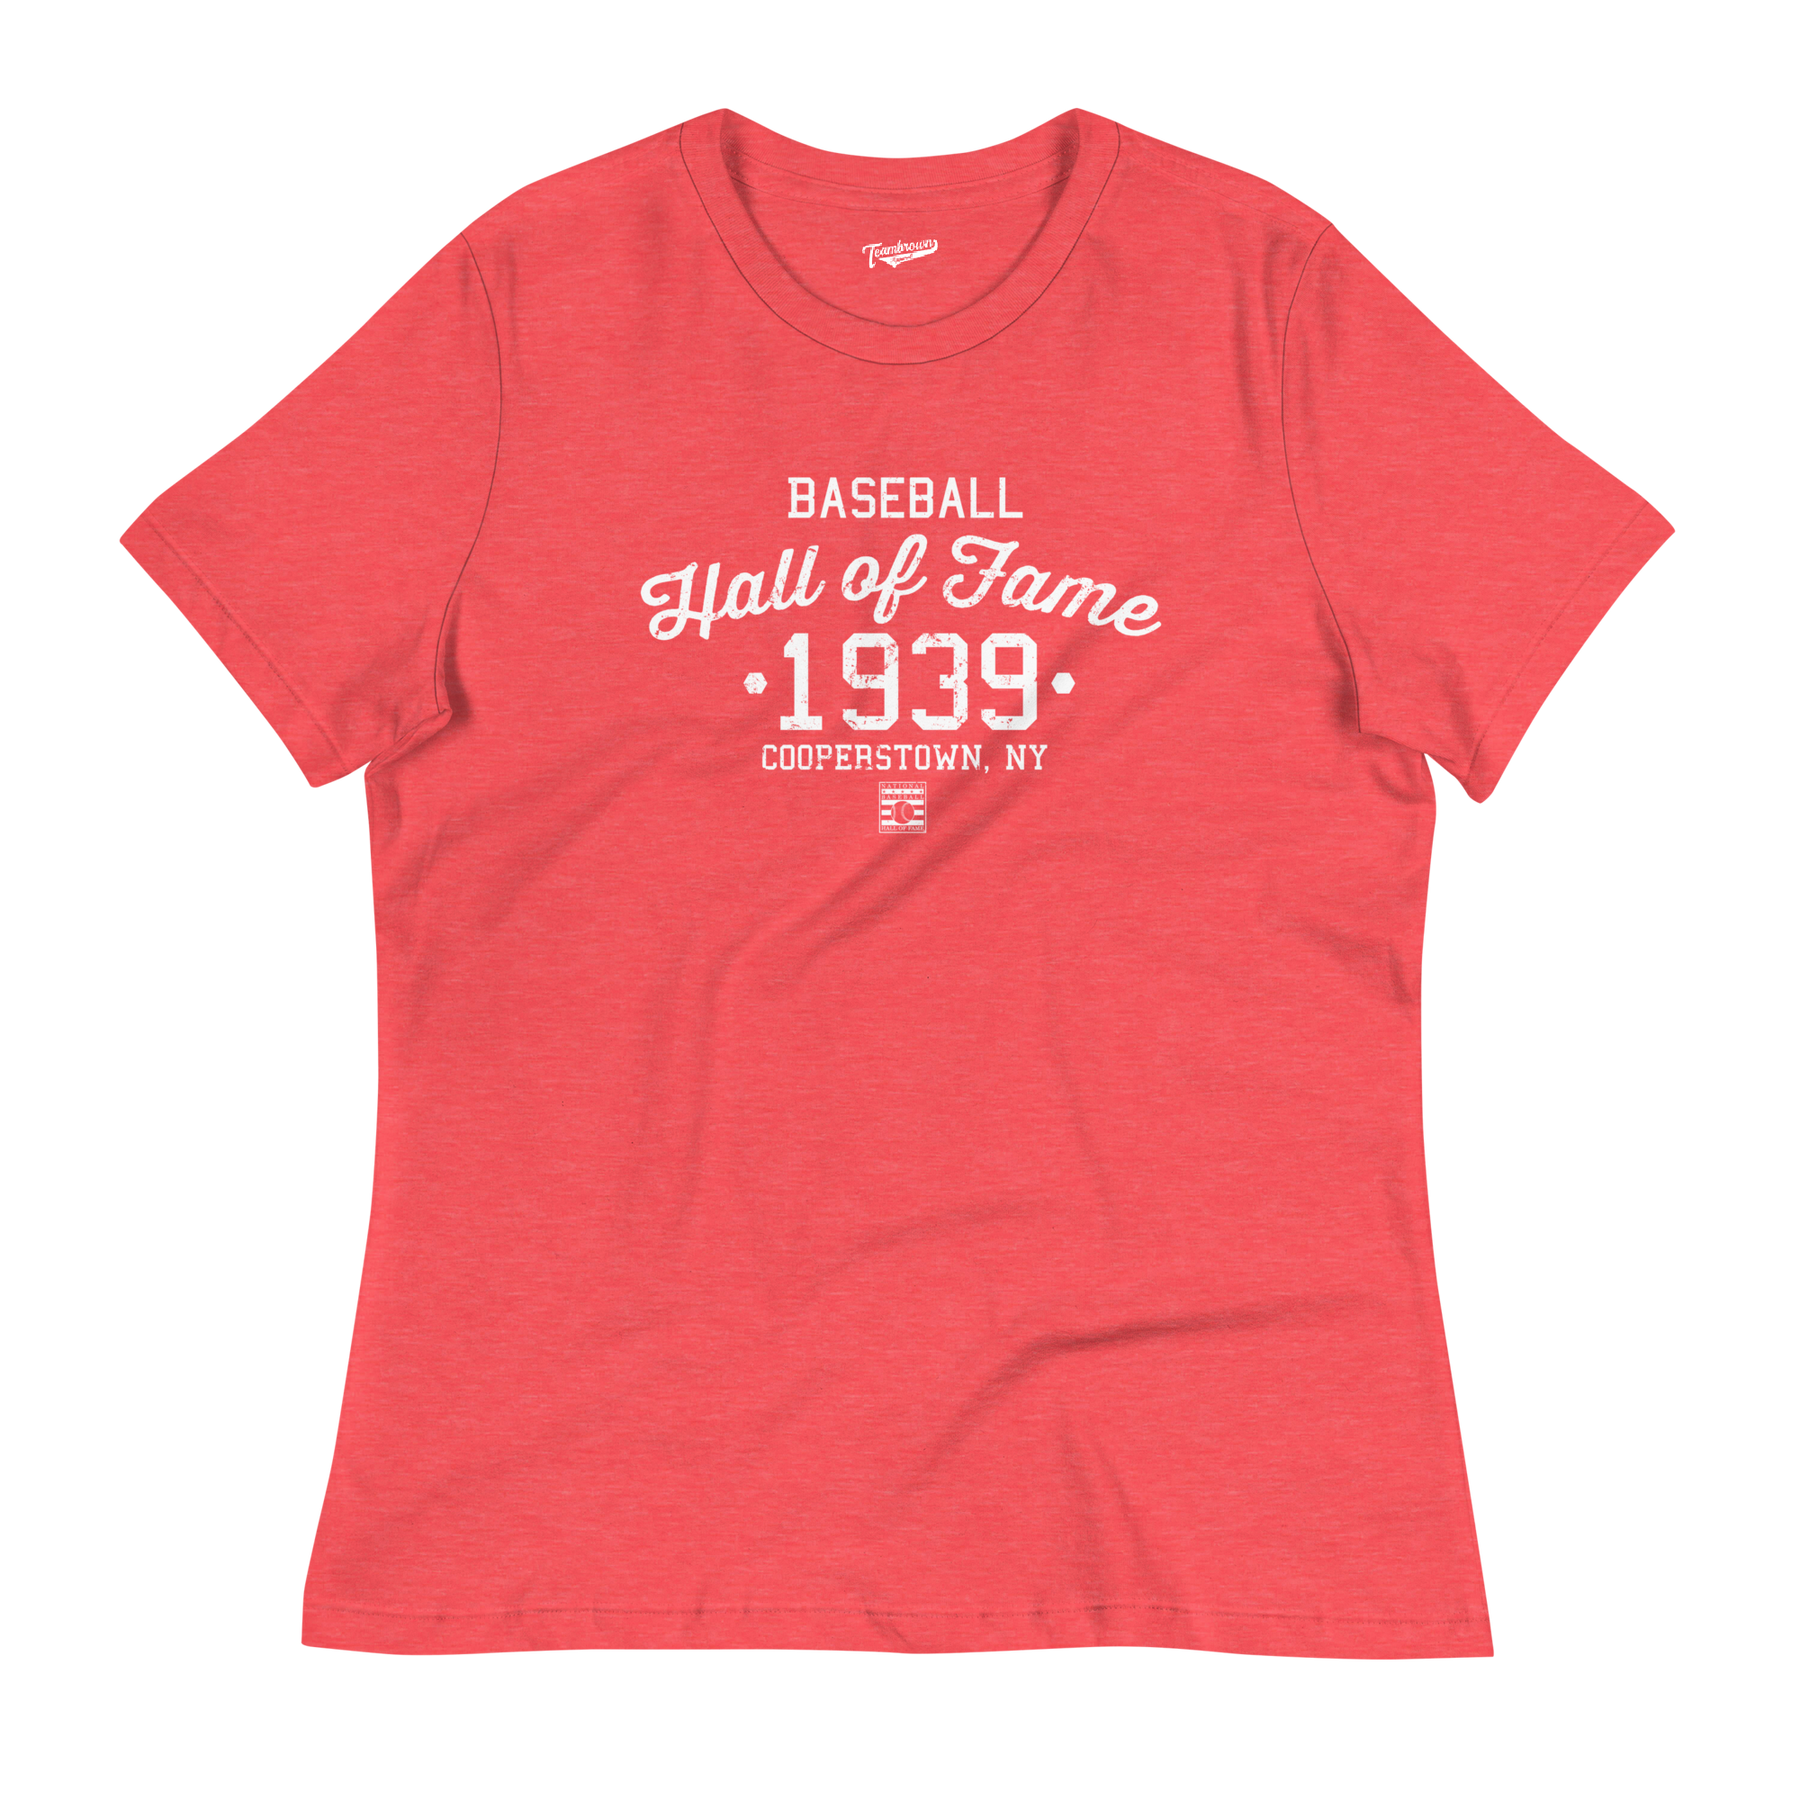 Baseball Hall of Fame - Est 1939 - Women's Relaxed Fit T-Shirt